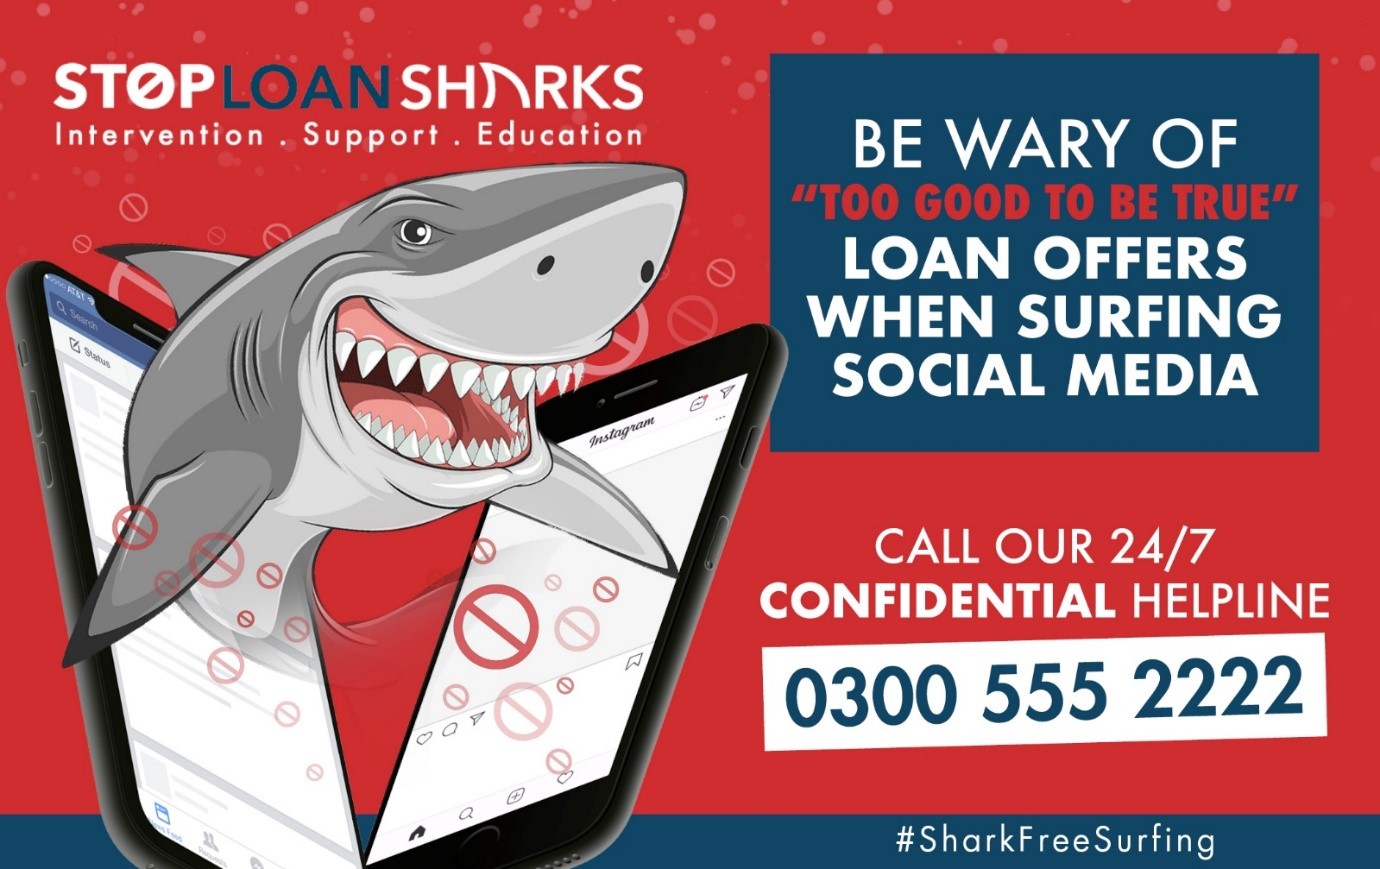 Poster - Be wary of "too goog to be true" loan offers when surfing social media. Call our 24/7 confidential helpline 0300 555 2222.  